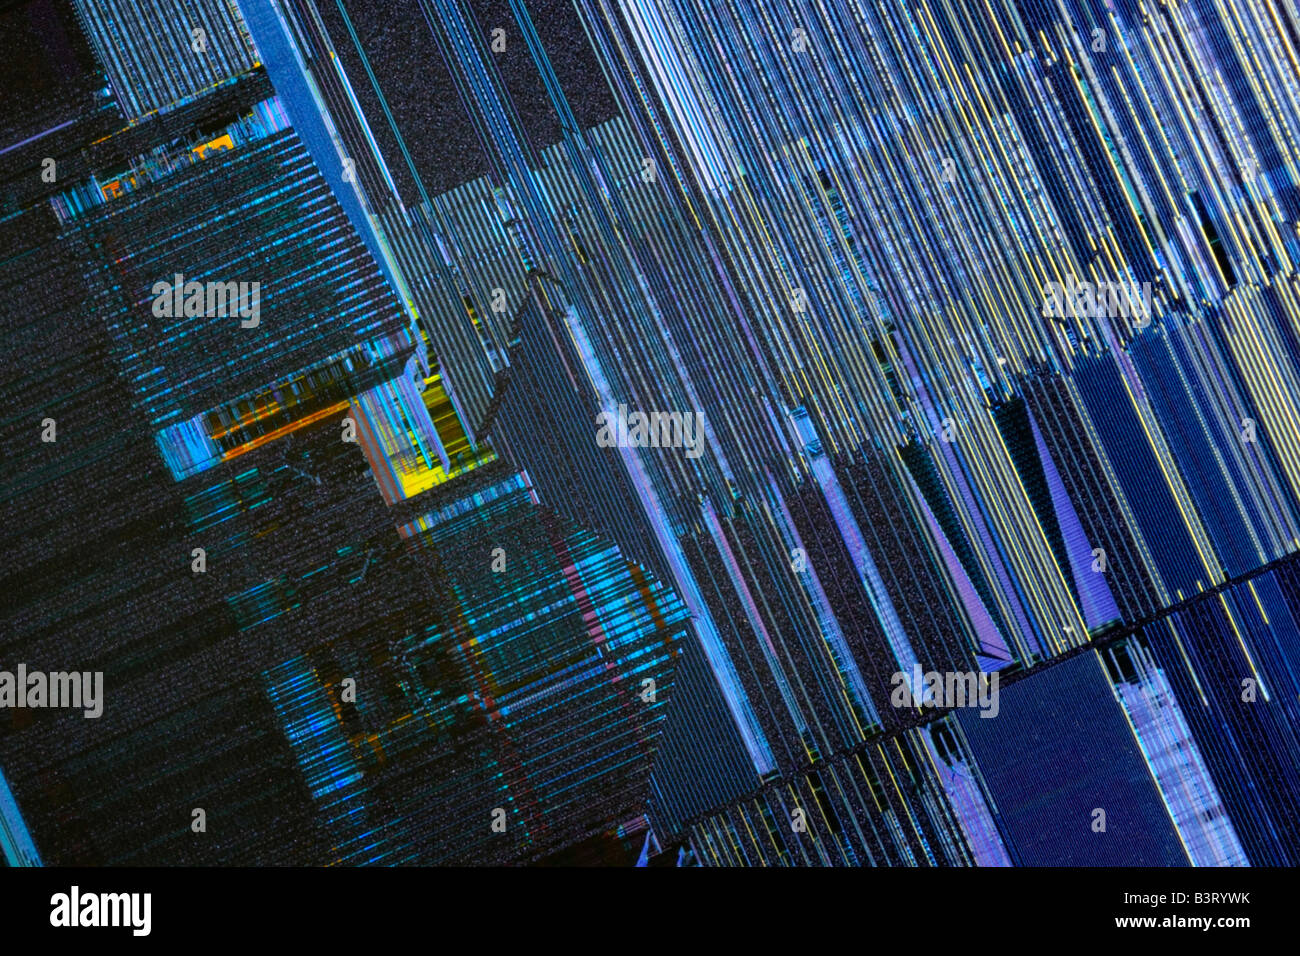 close up of an Intel Pentium microprocessor silicon chip Stock Photo